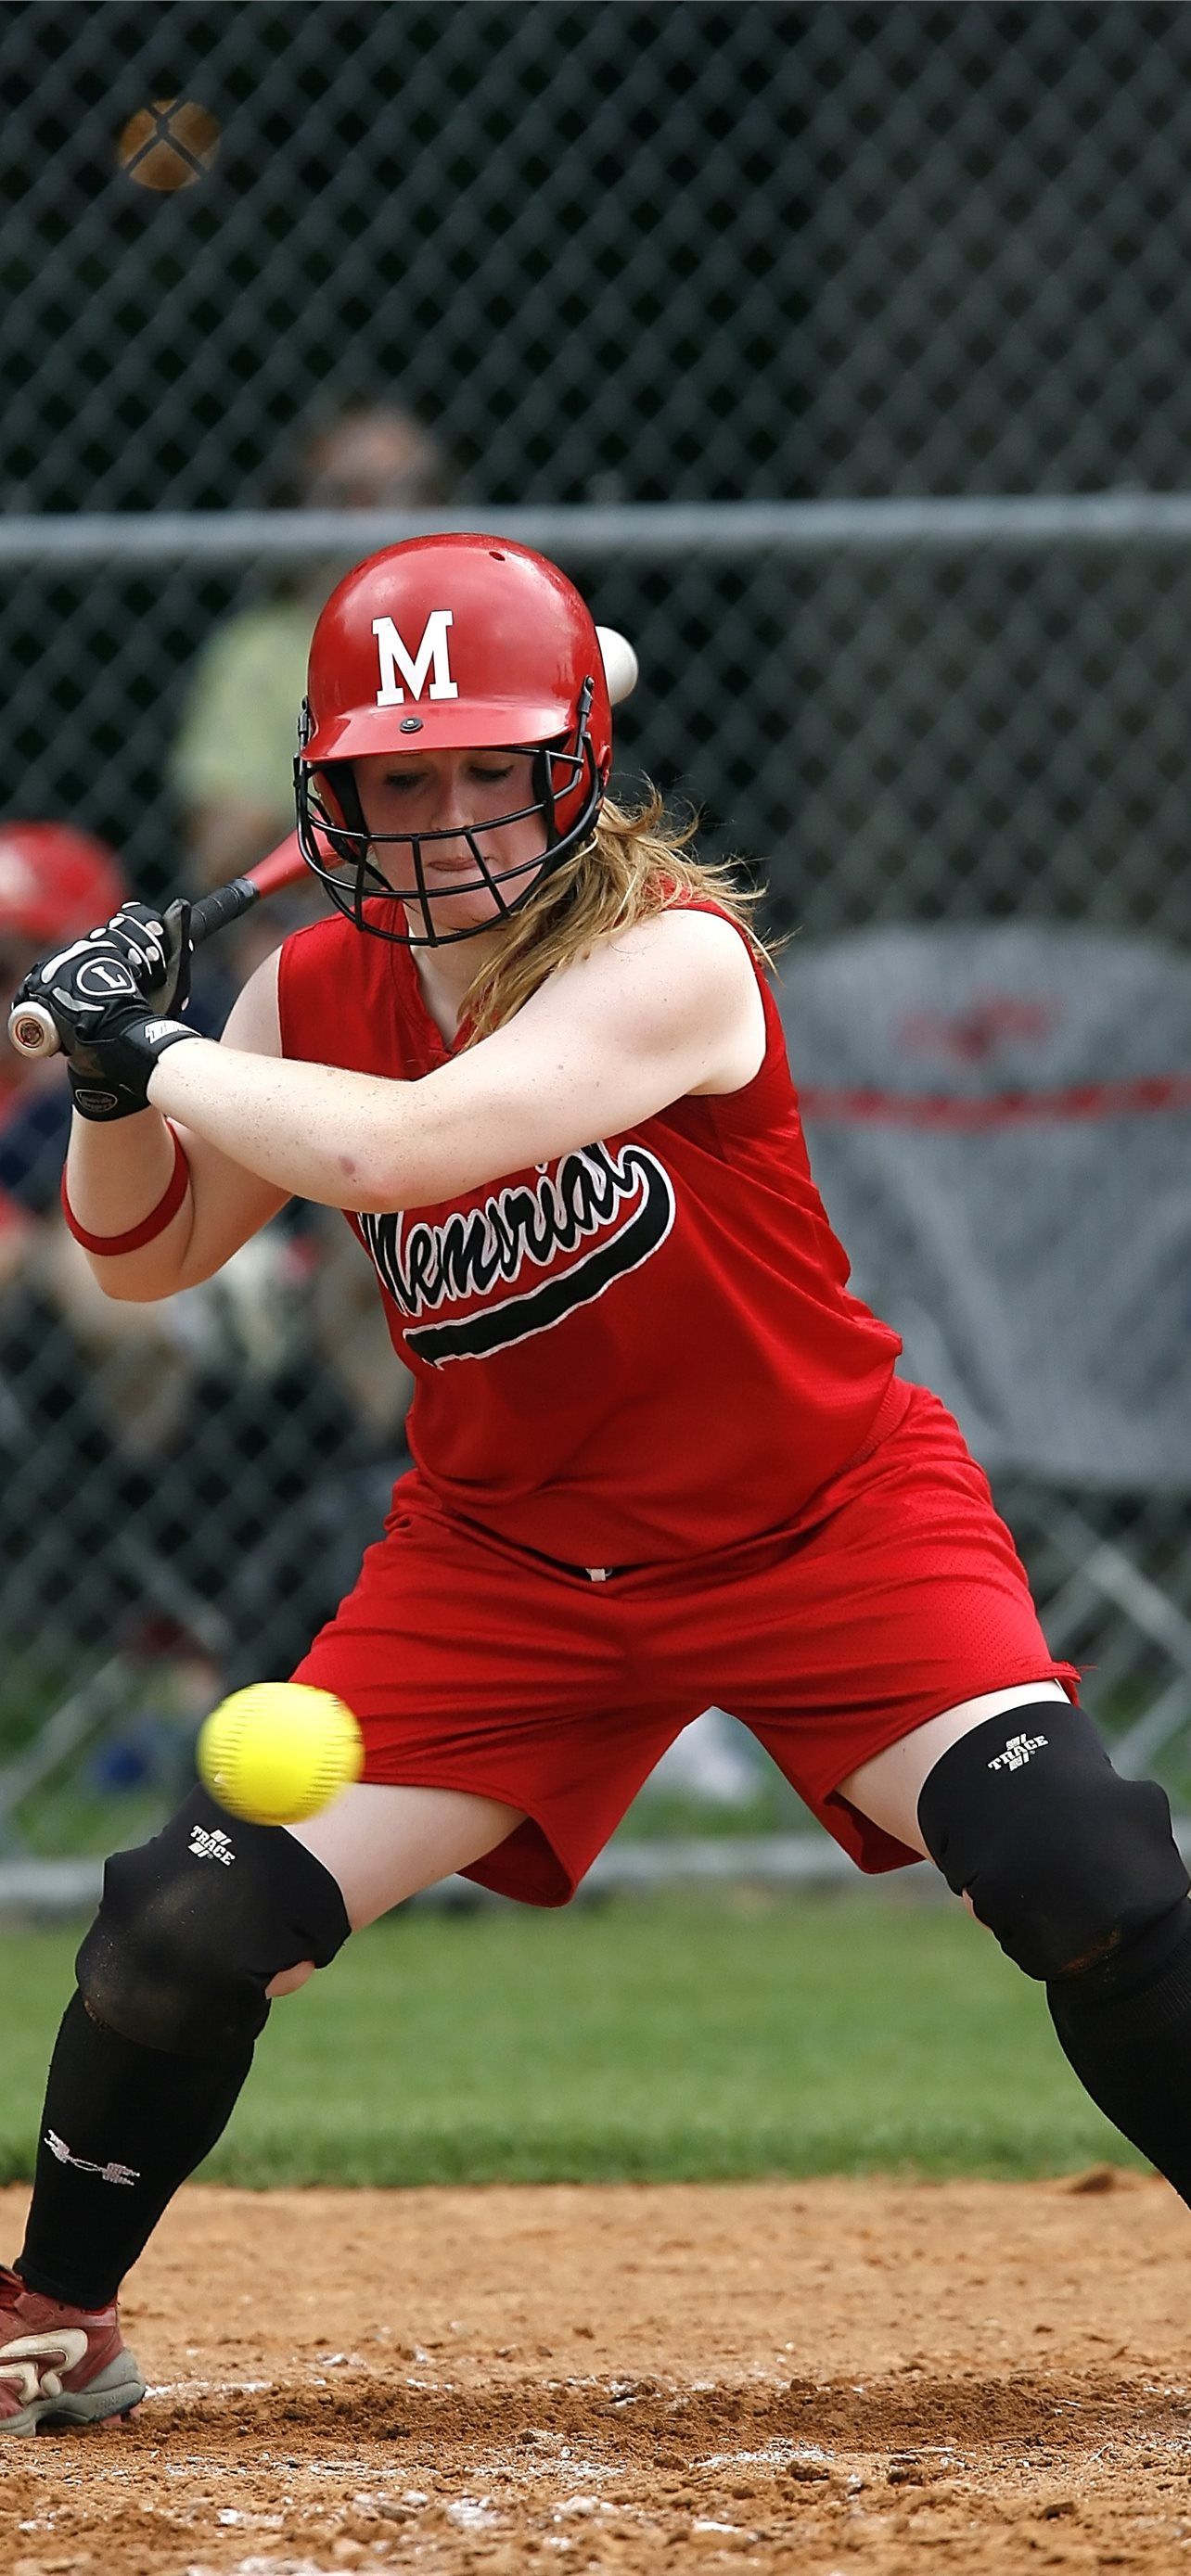 A softball player in a red uniform swings at a ball. - Softball